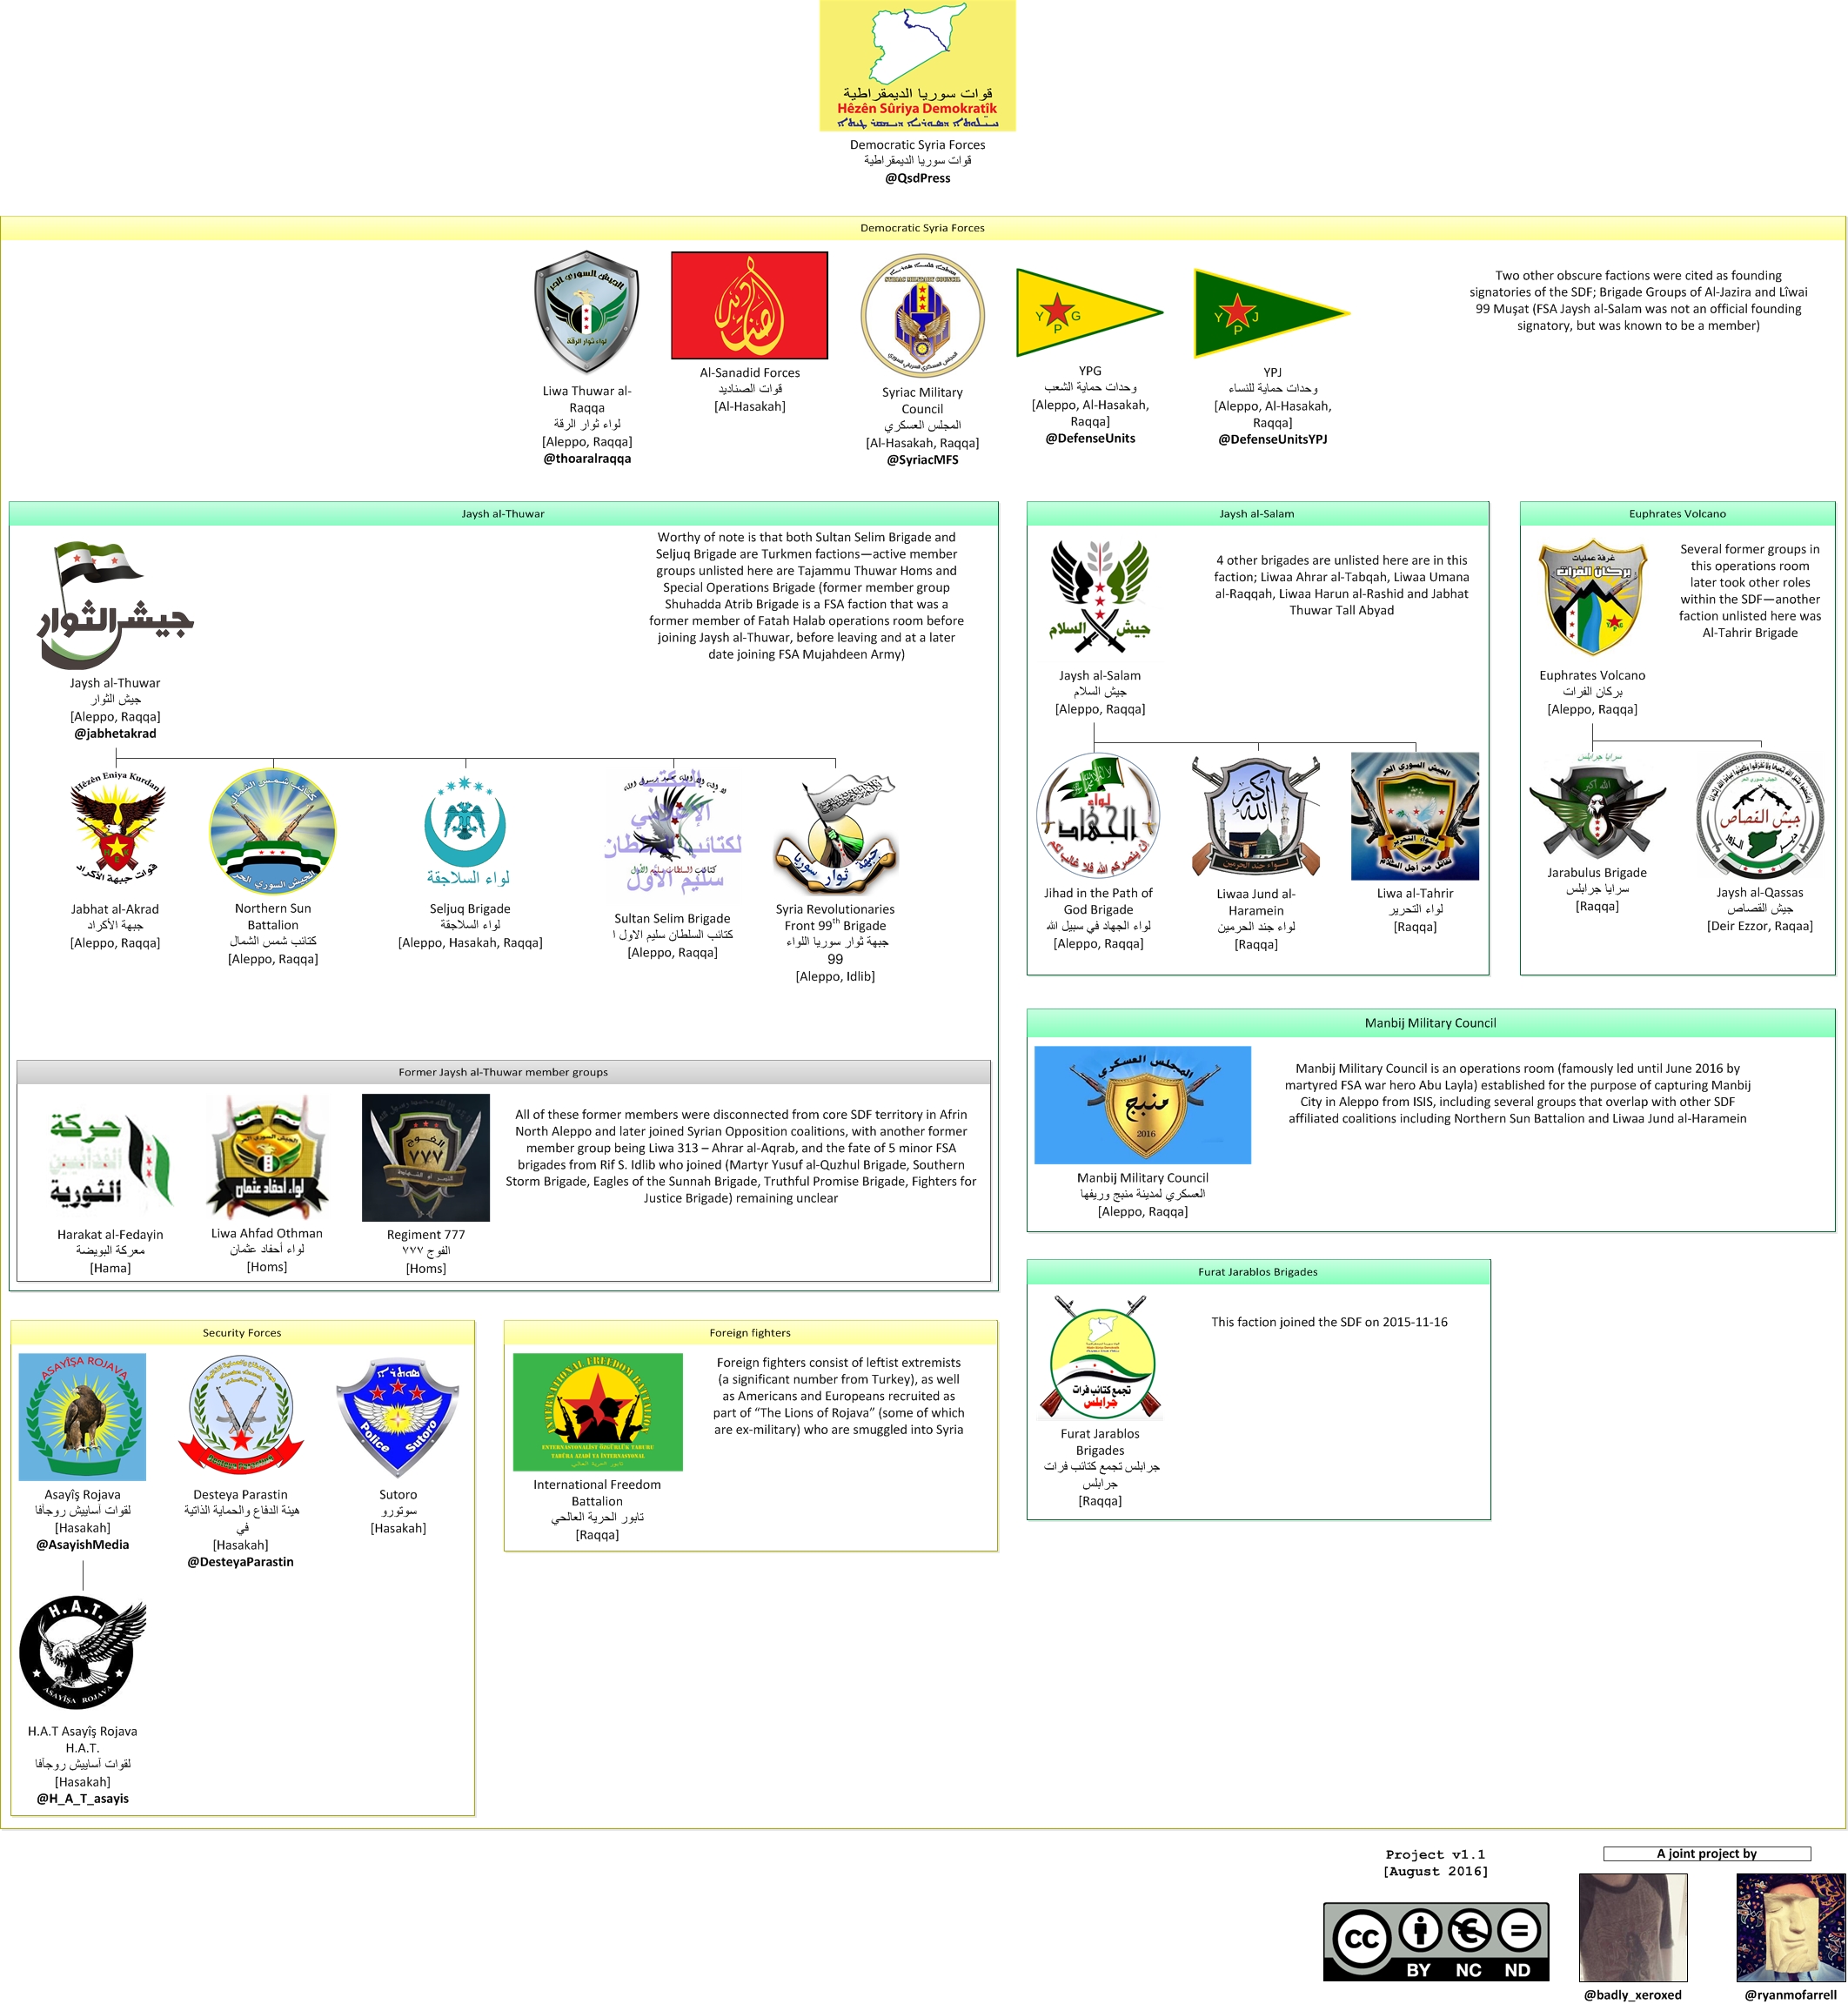 All identifiable current and former SDF factions